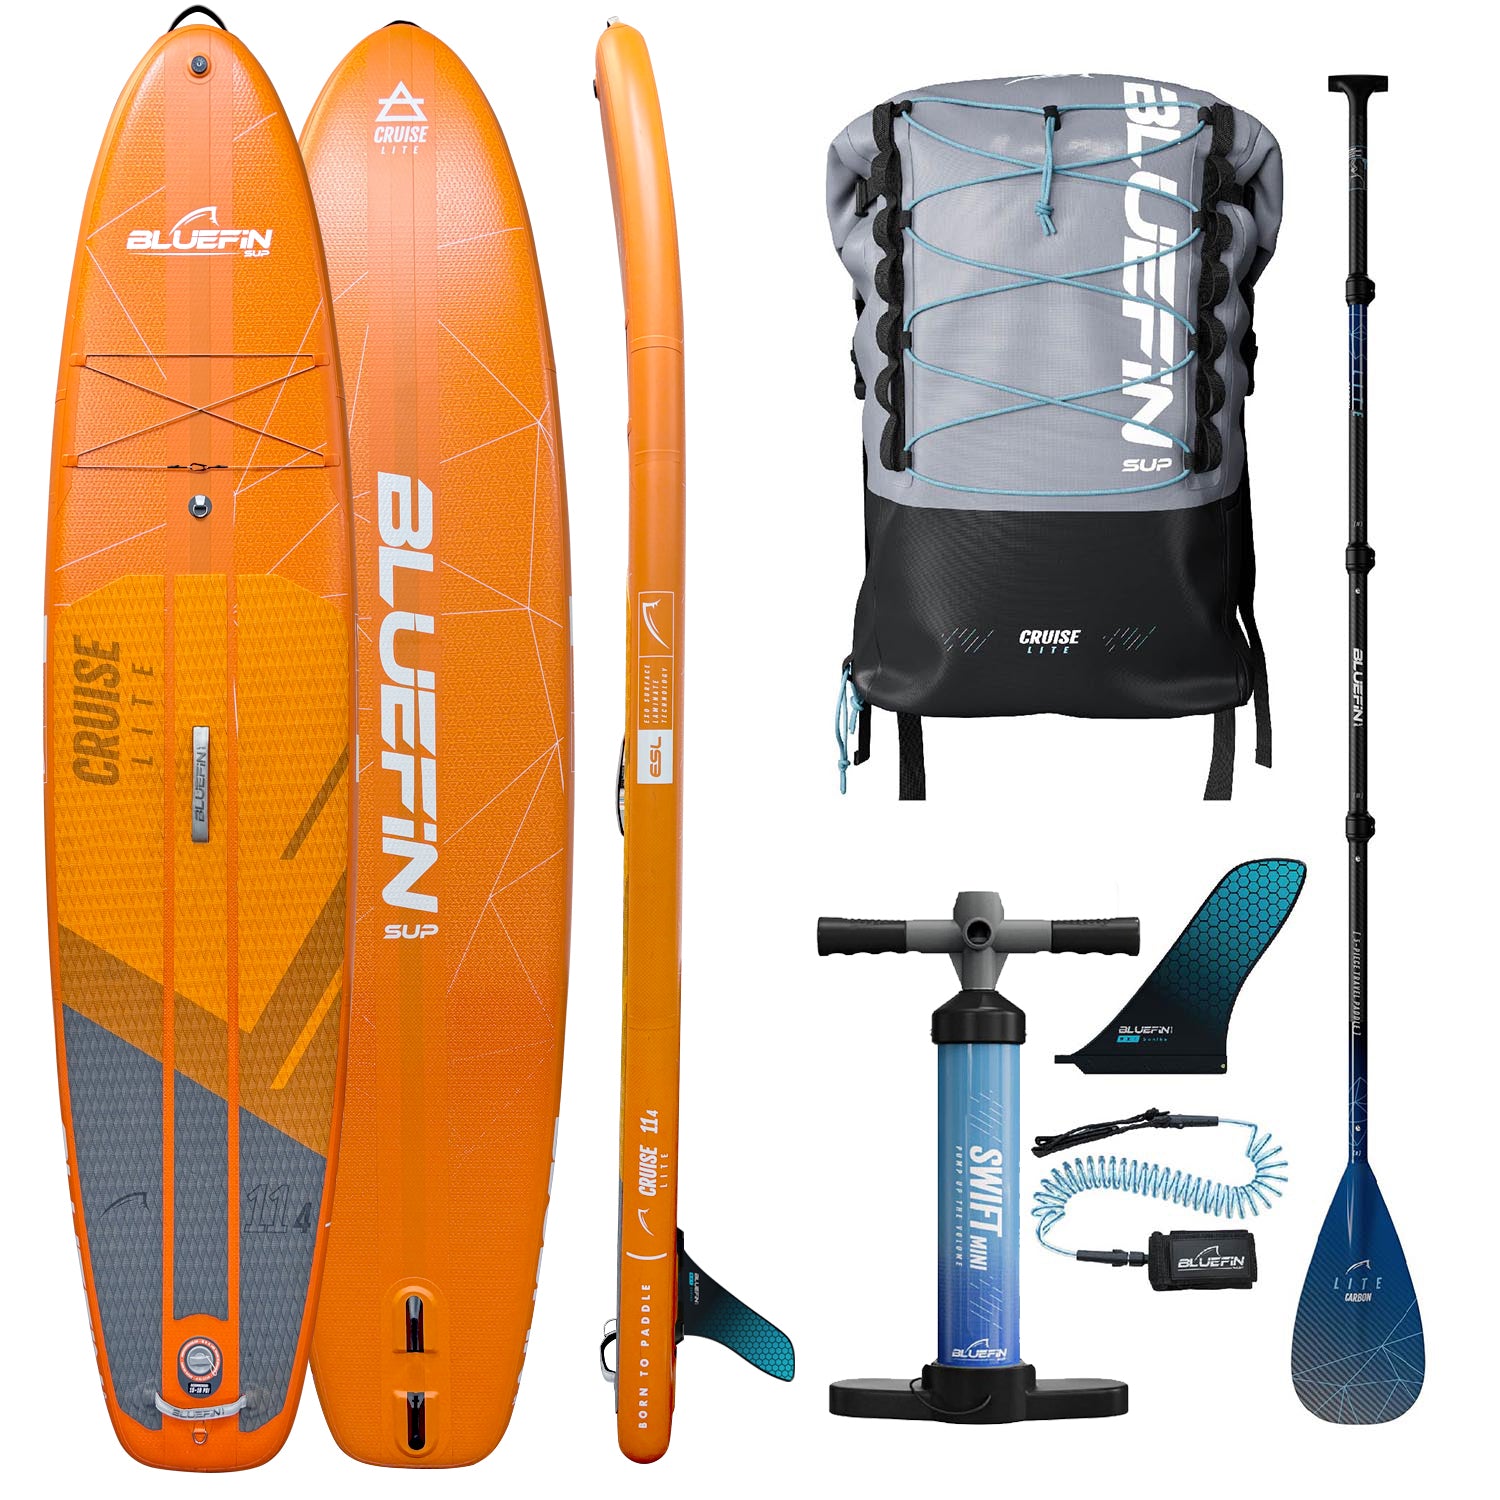 <tc>Cruise Lite</tc> Gamme de paddleboards gonflables